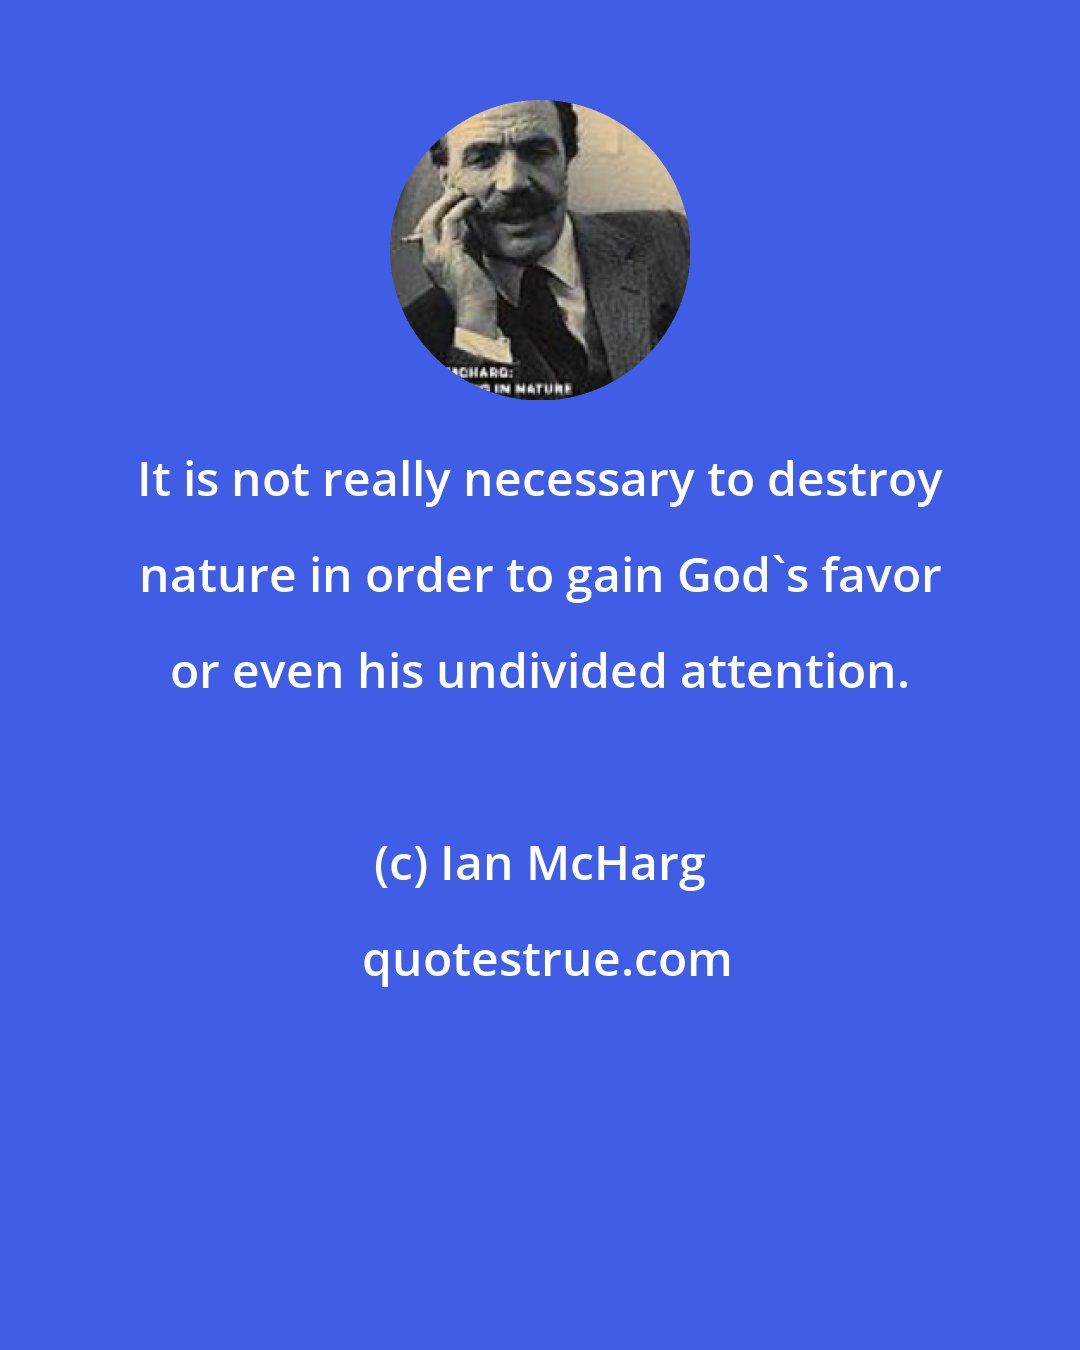 Ian McHarg: It is not really necessary to destroy nature in order to gain God's favor or even his undivided attention.